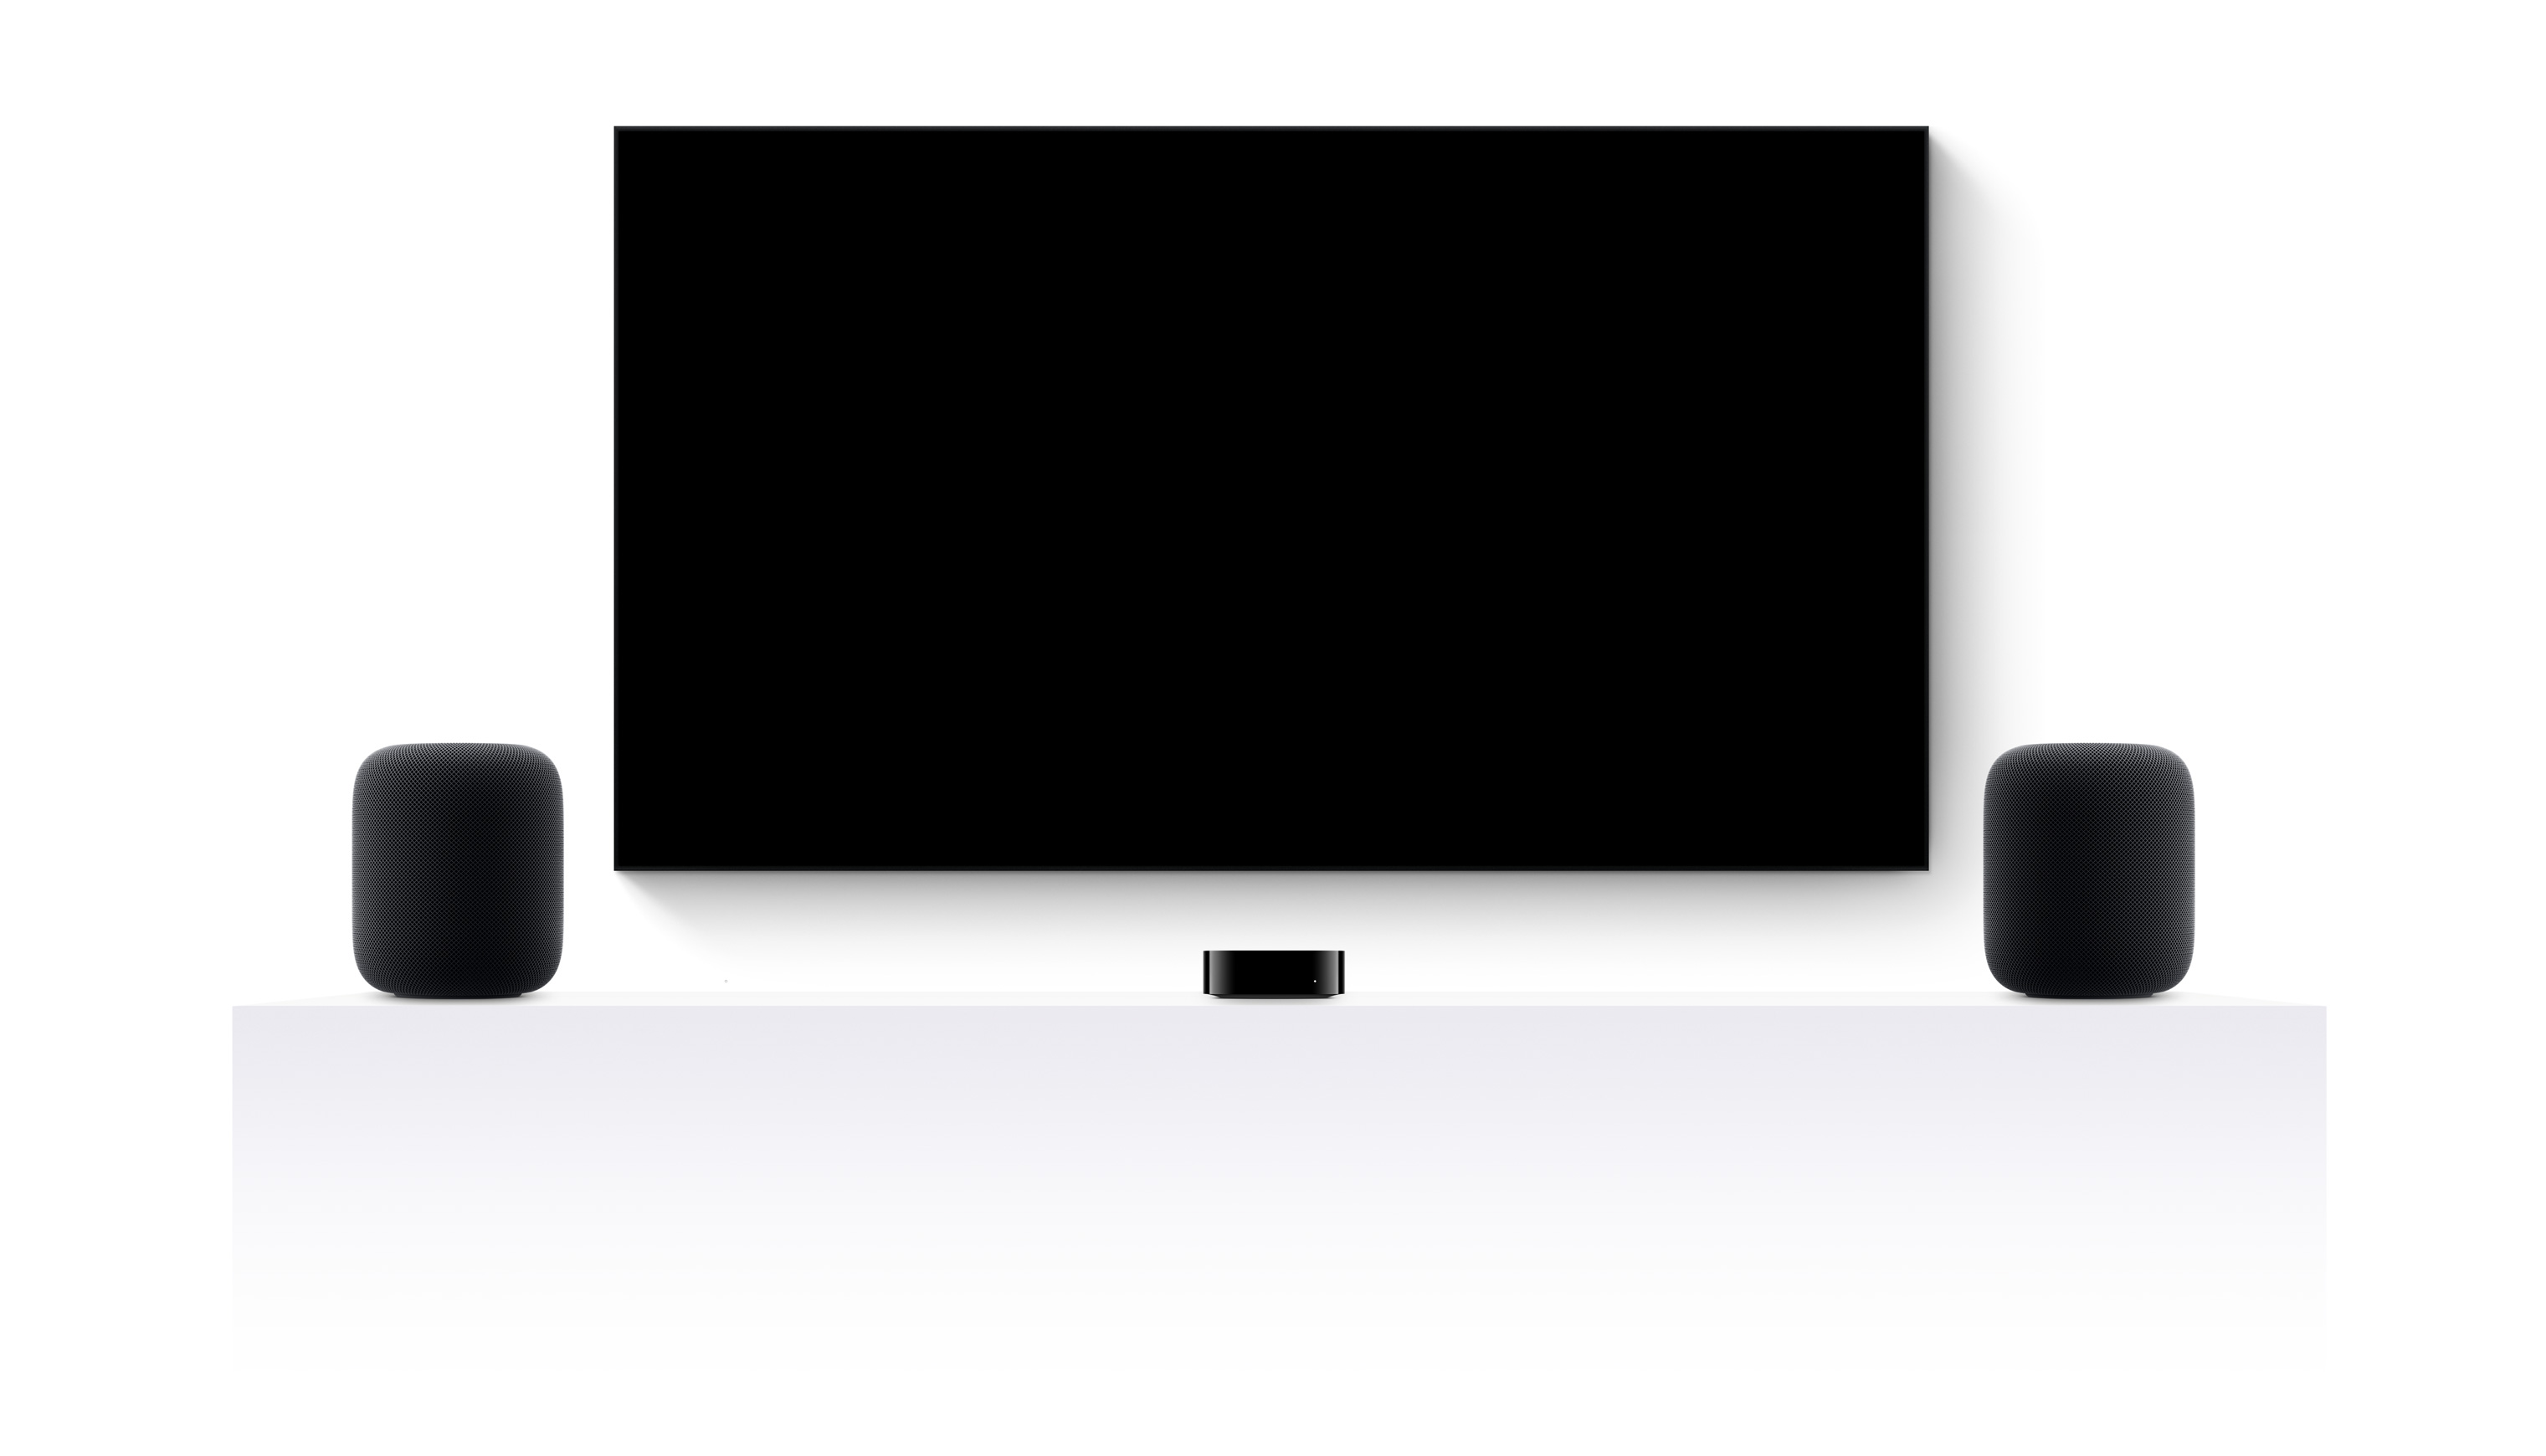 Apple TV 4k, two HomePods, and a flatscreen television showing an edited trailer of various Apple TV+ movies and shows